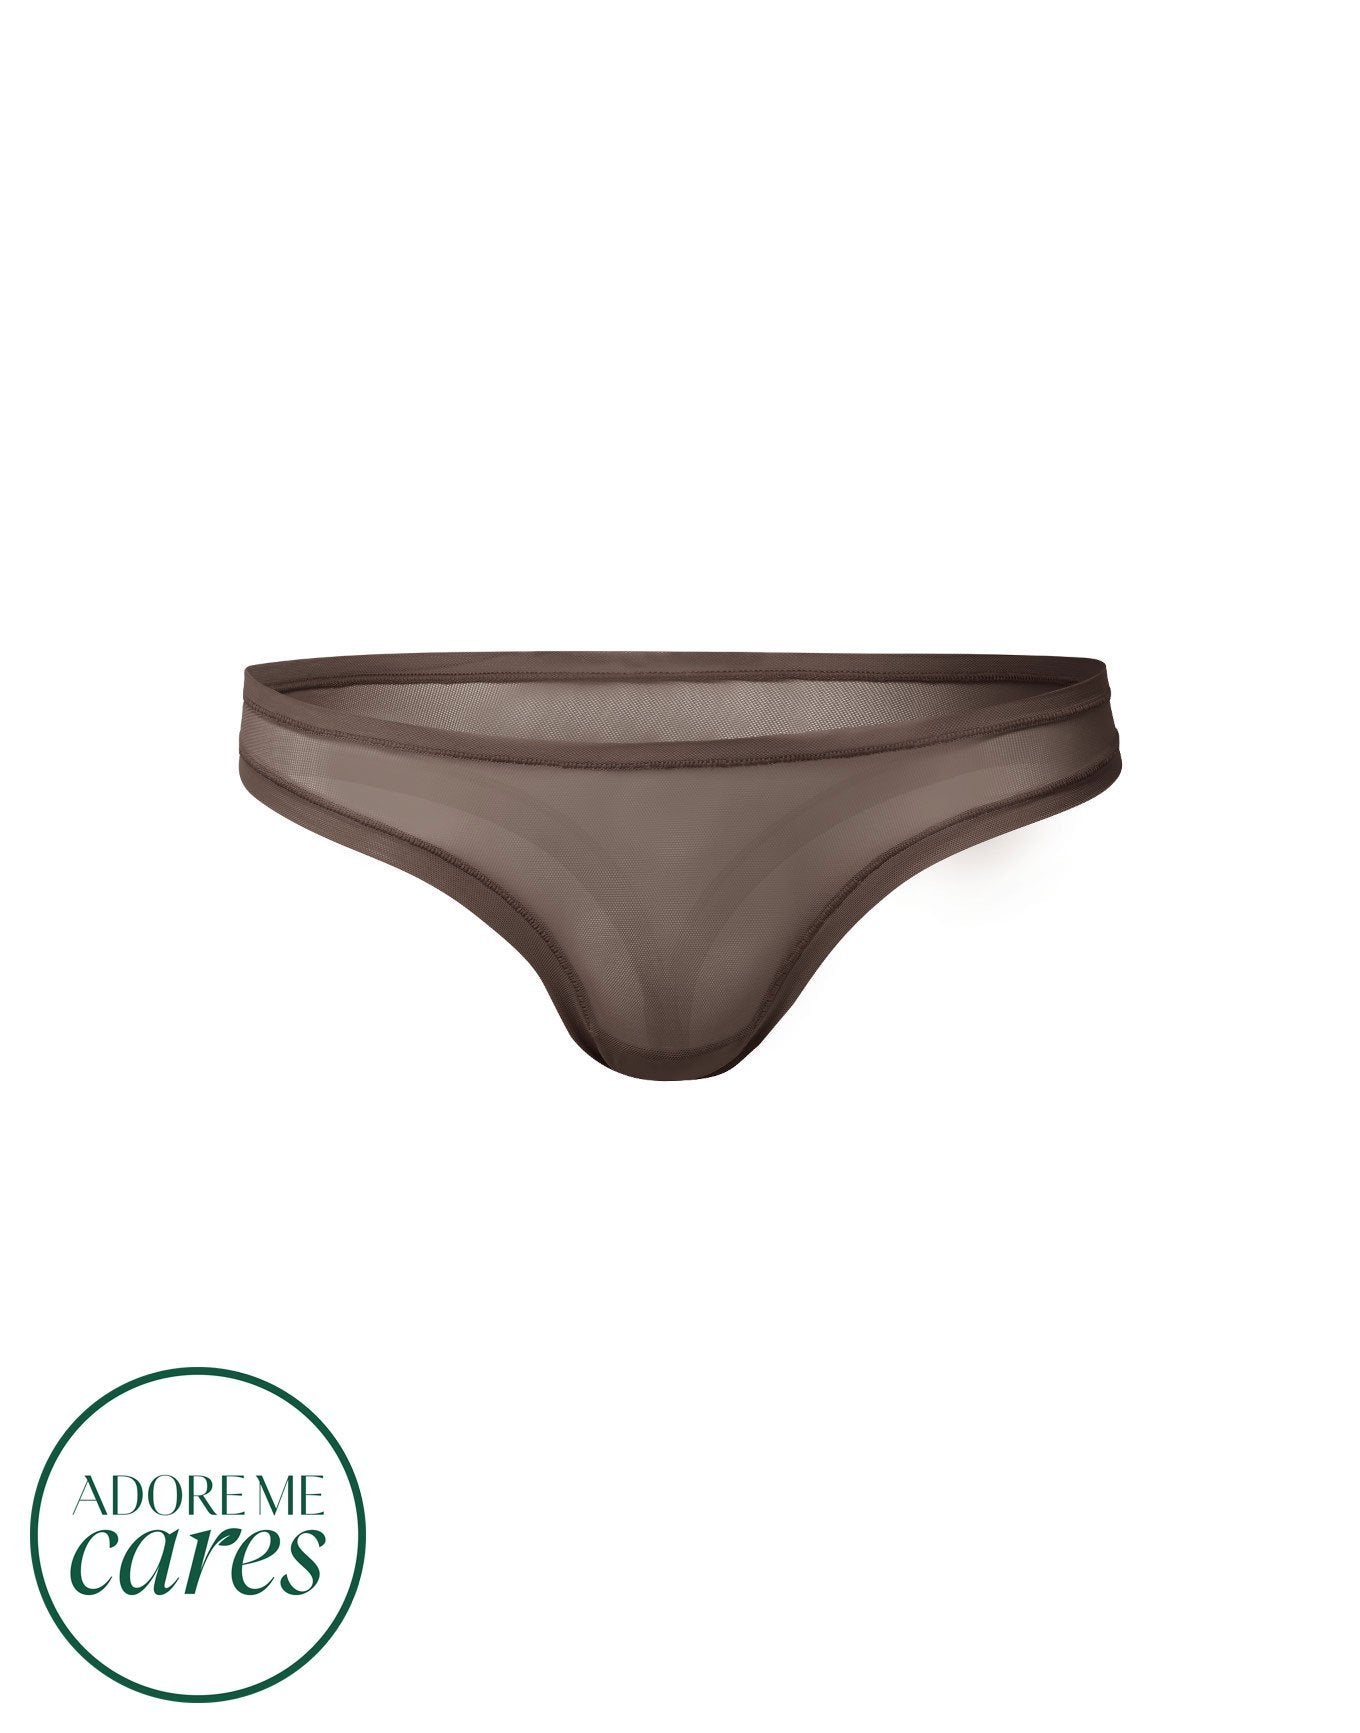 nueskin Bonnie Mesh Low-Rise Thong in color Bracken and shape thong